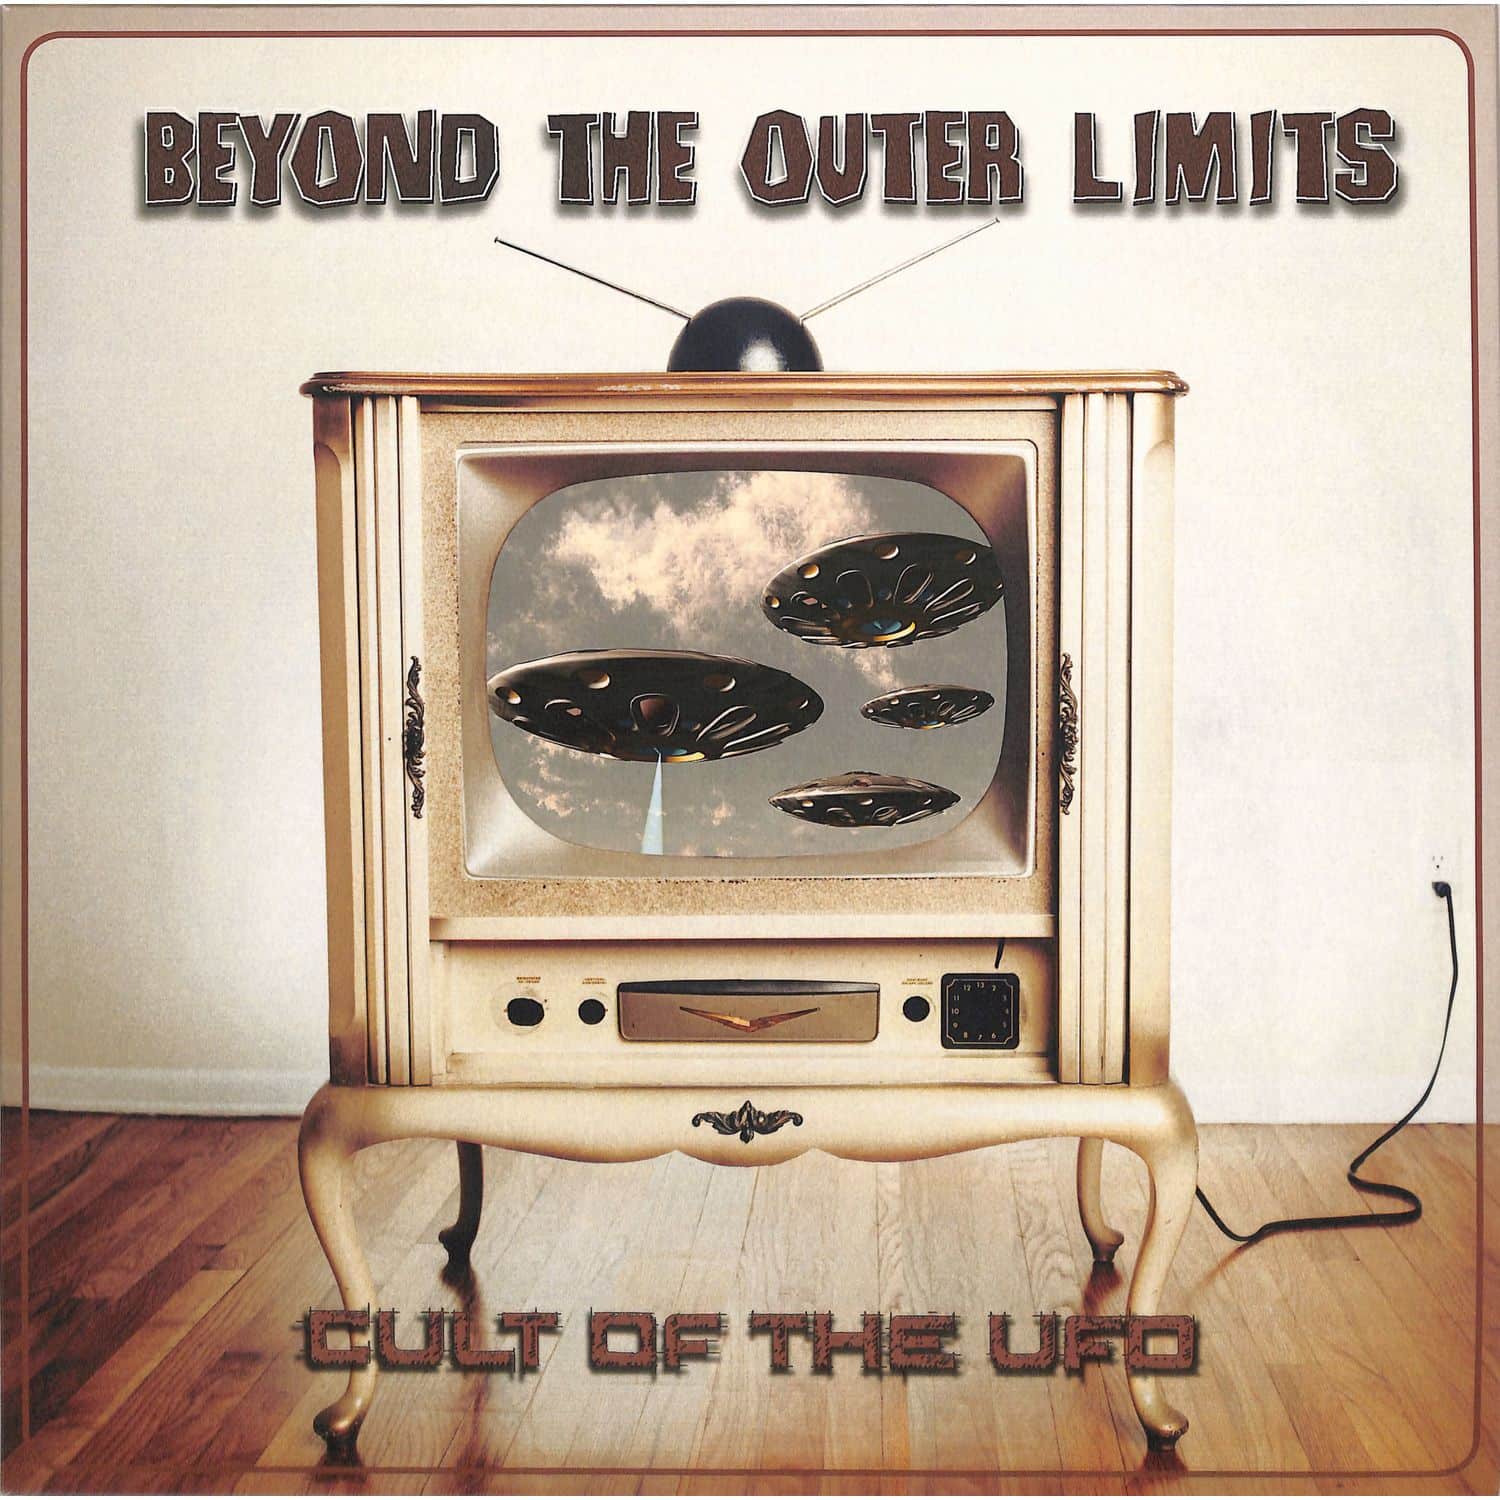 Cult Of The UFO - BEYOND THE OUTER LIMITS